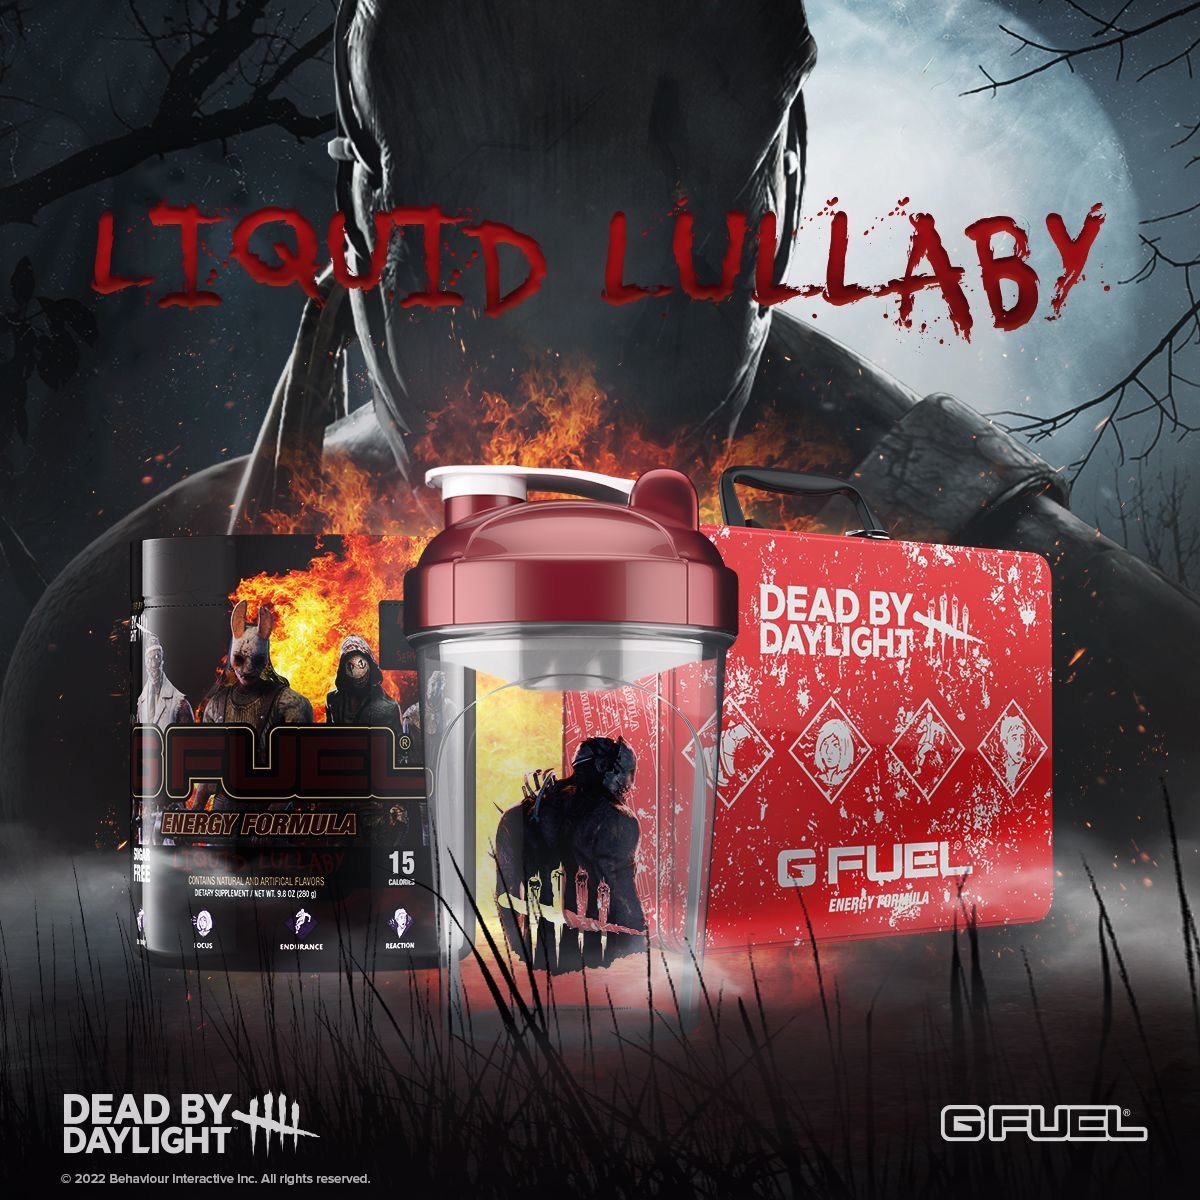 G FUEL and Dead by Daylight Team Up in The Fog for a Brand-New Flavor - G FUEL Liquid Lullaby!